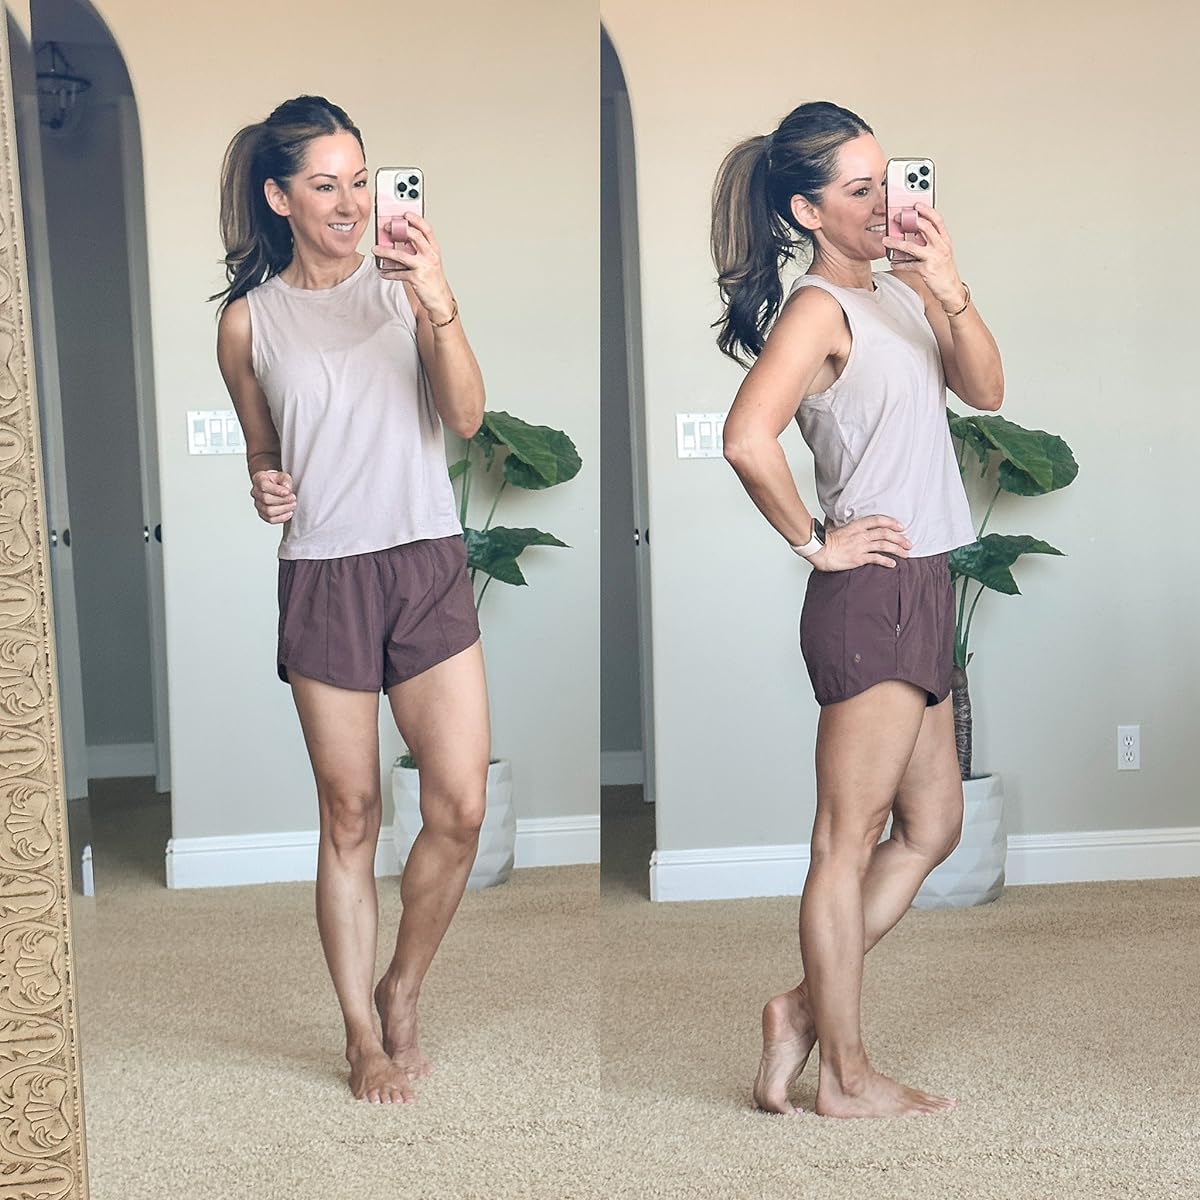 top 23 fashion favorites of 2023 | top 23 of 2023, fashion, fashion favorites, fashion finds, outfit inspo, workout, fitness, athleisure, tank top, running shorts